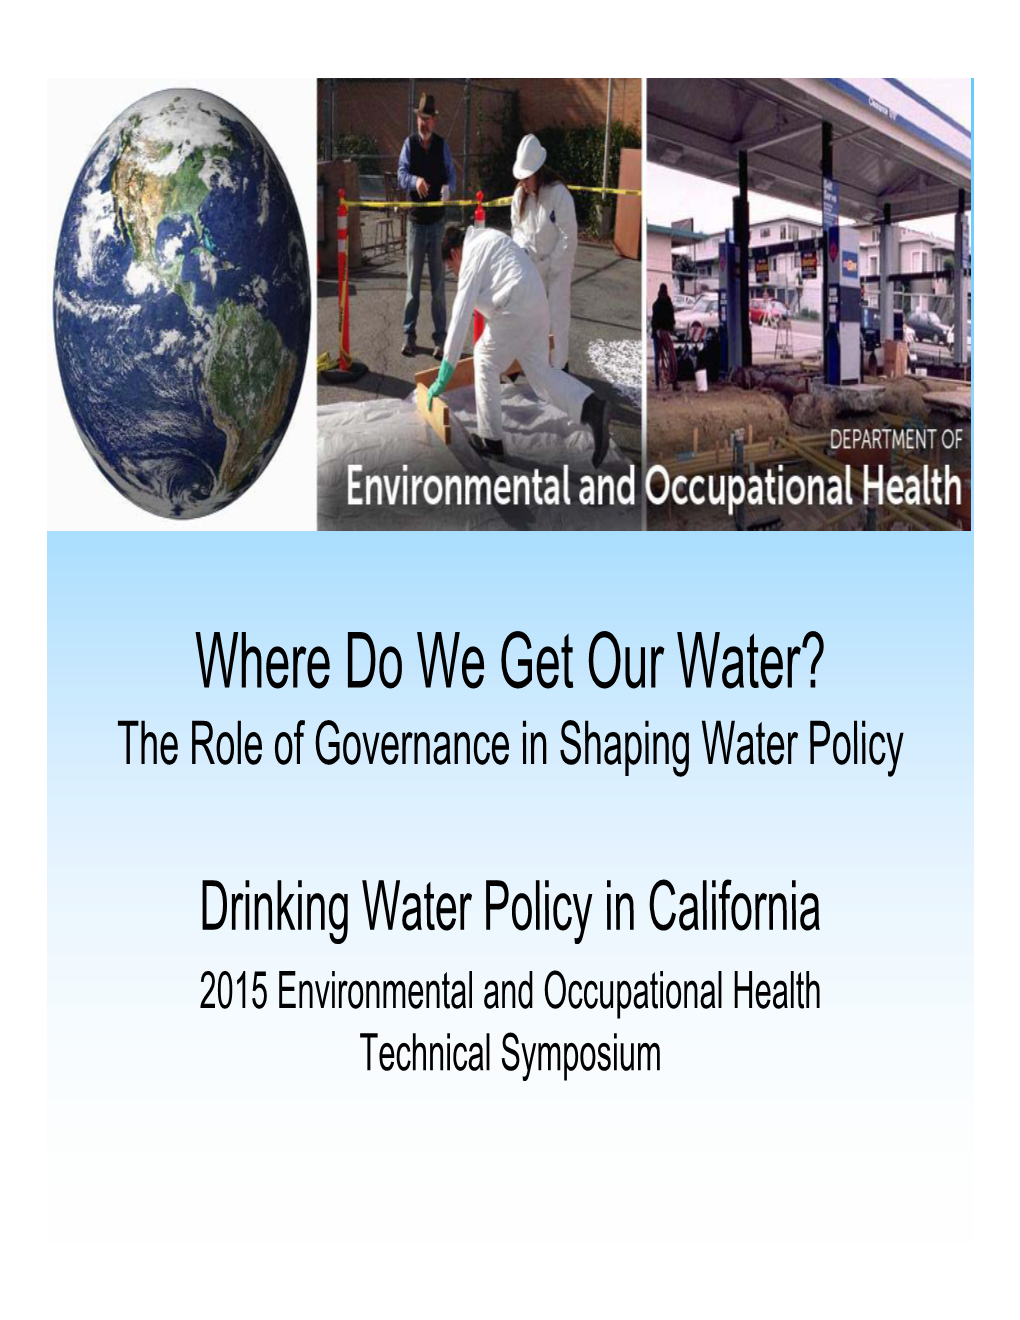 Where Do We Get Our Water? the Role of Governance in Shaping Water Policy